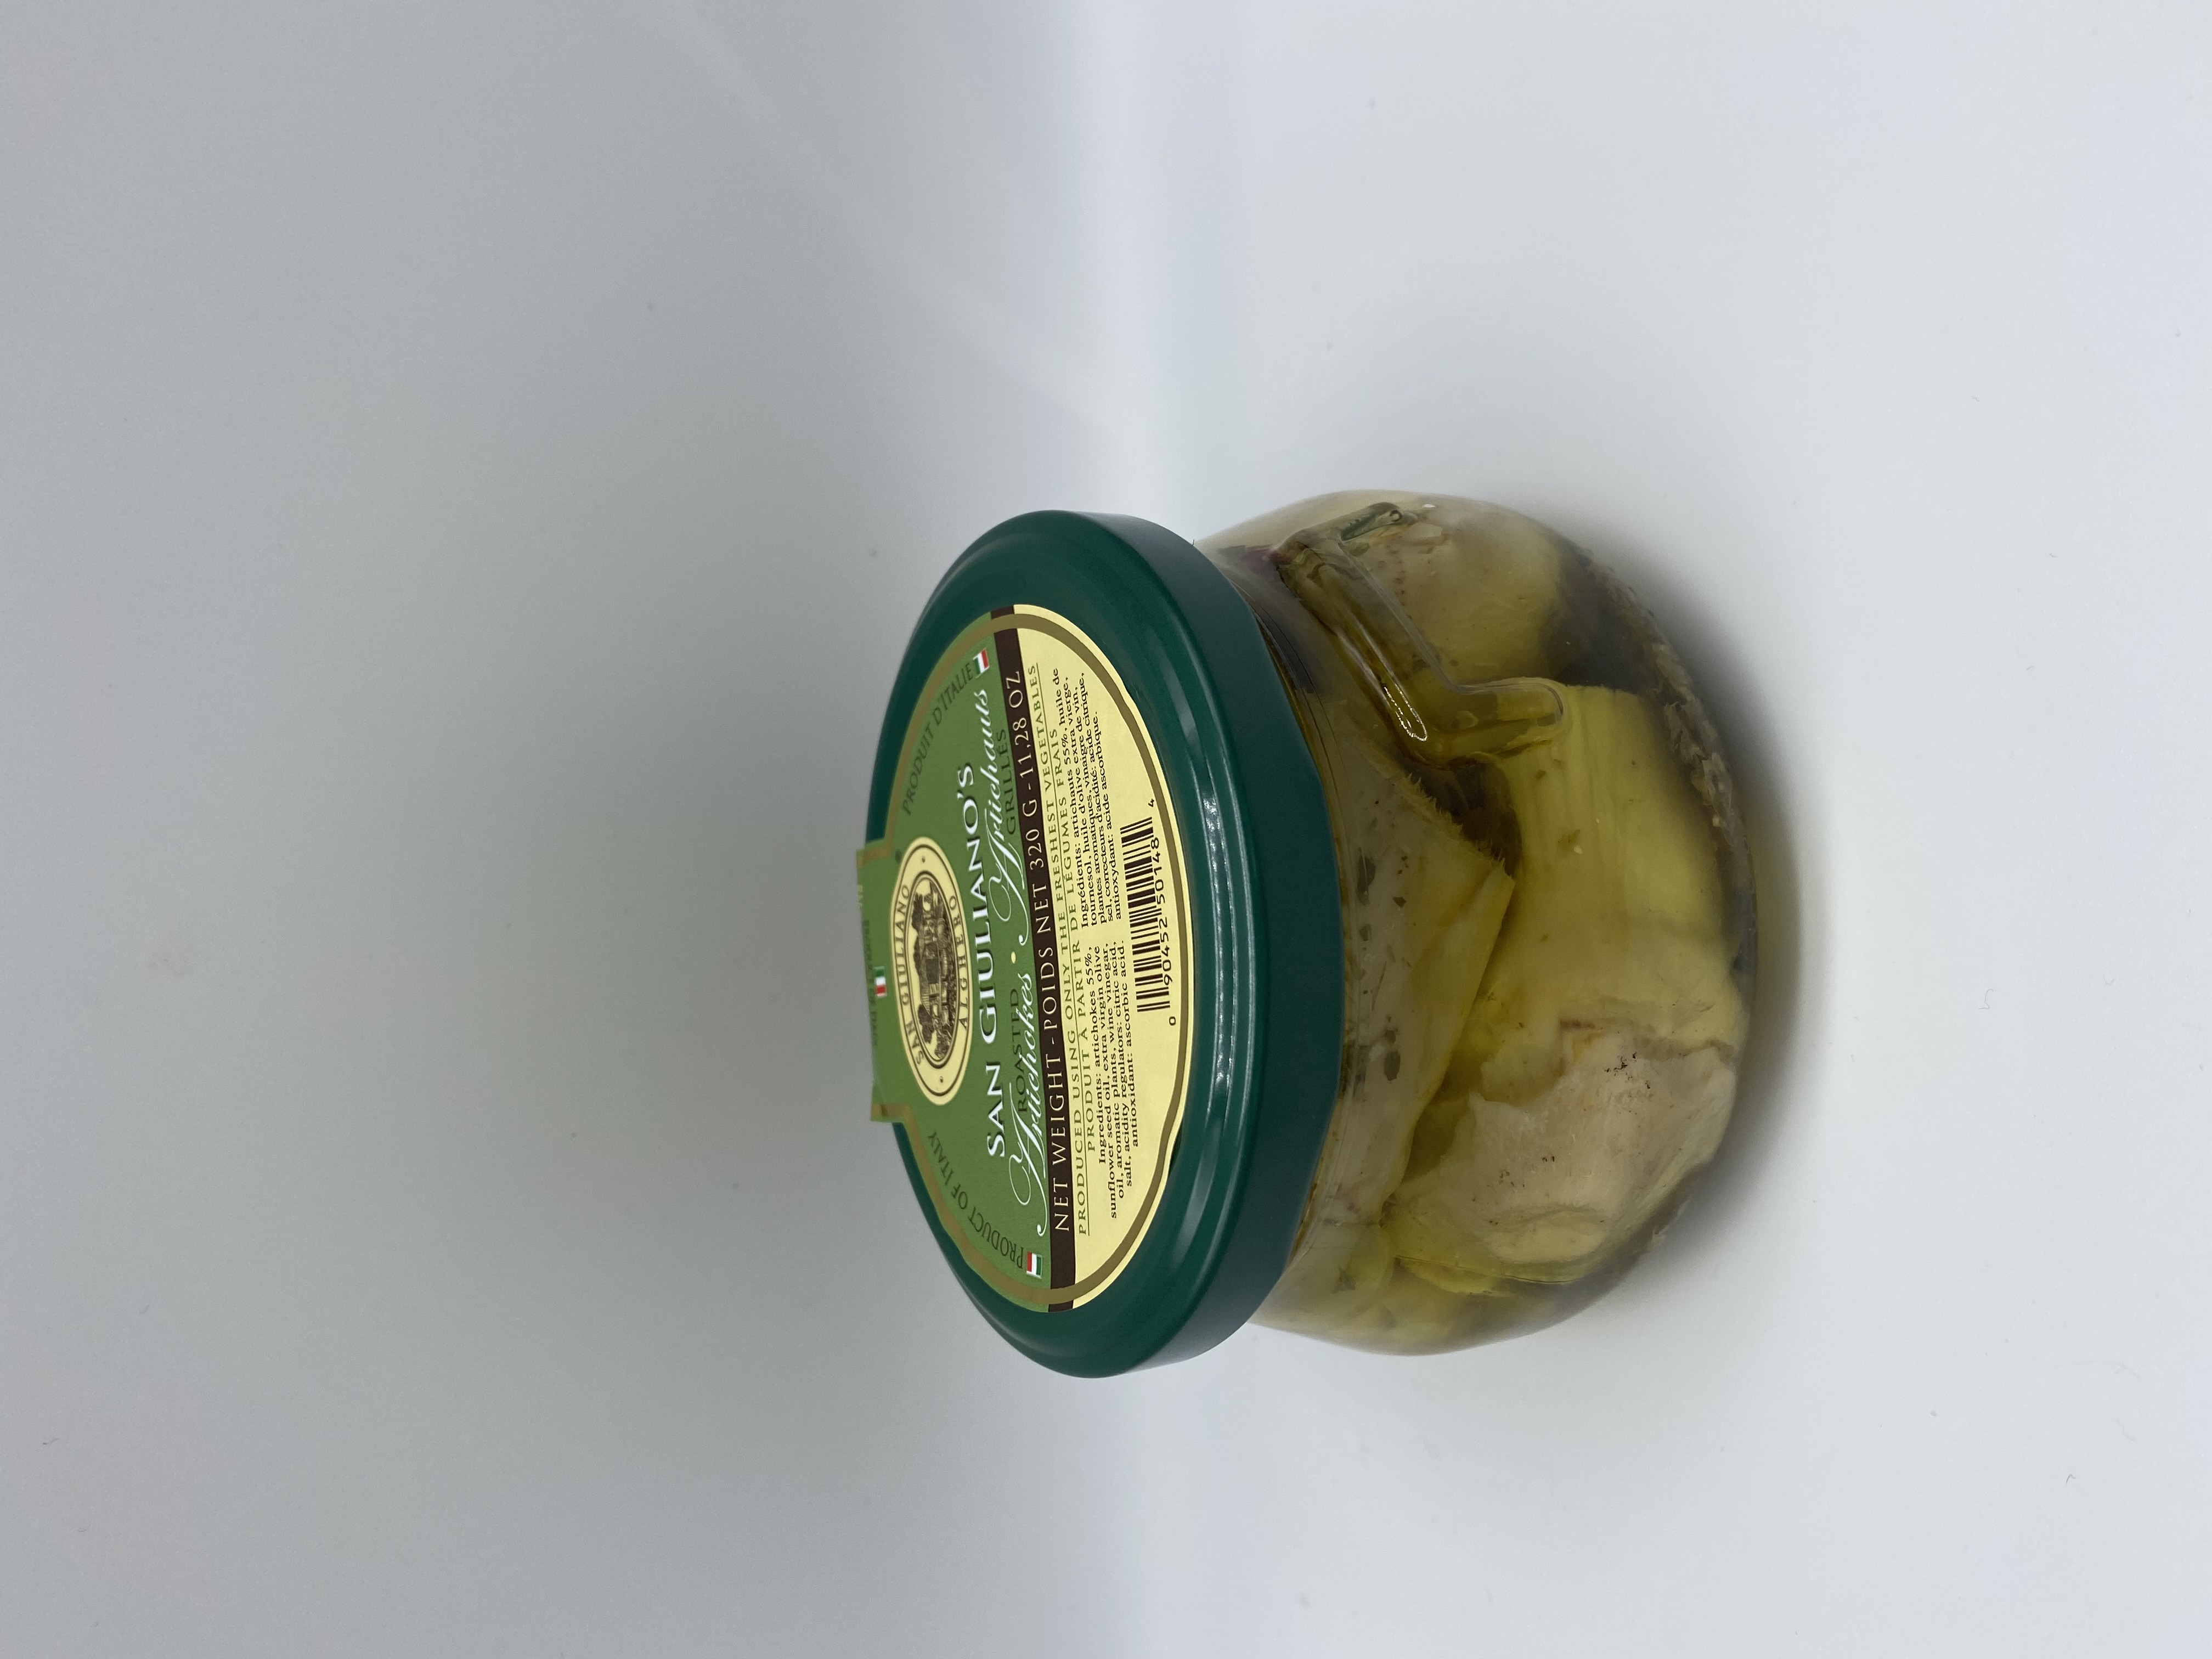 Product Image for Roasted Artichokes